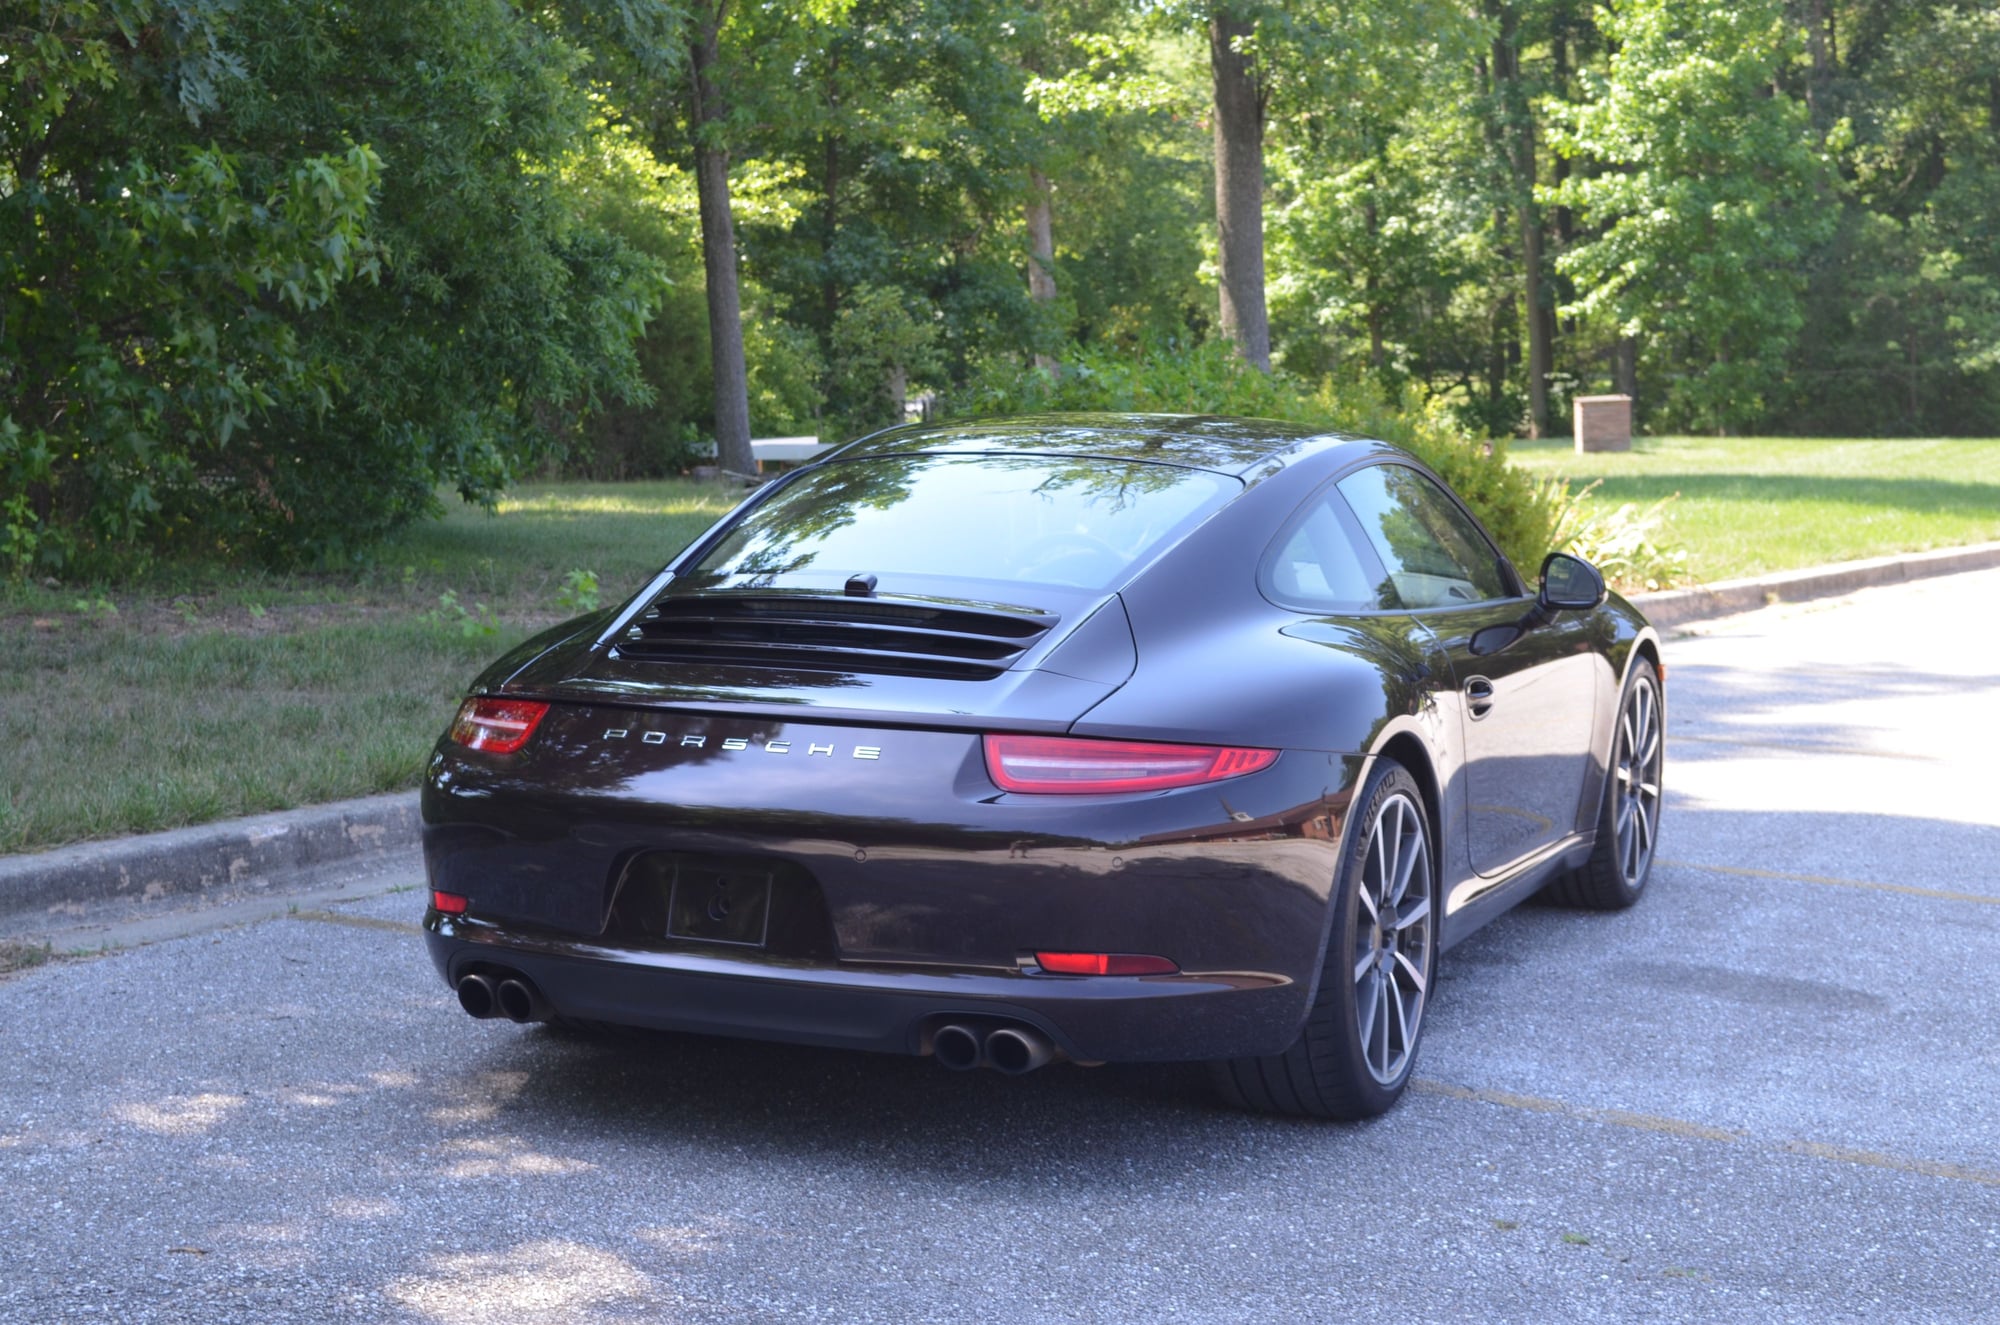 2013 Porsche 911 - 2013 Porsche 991.1 C2 PDK - Last of the naturally aspirated Carreras! - Used - VIN WP0AA2A96DS106568 - 69,500 Miles - 6 cyl - 2WD - Automatic - Coupe - Brown - Bowie, MD 20720, United States